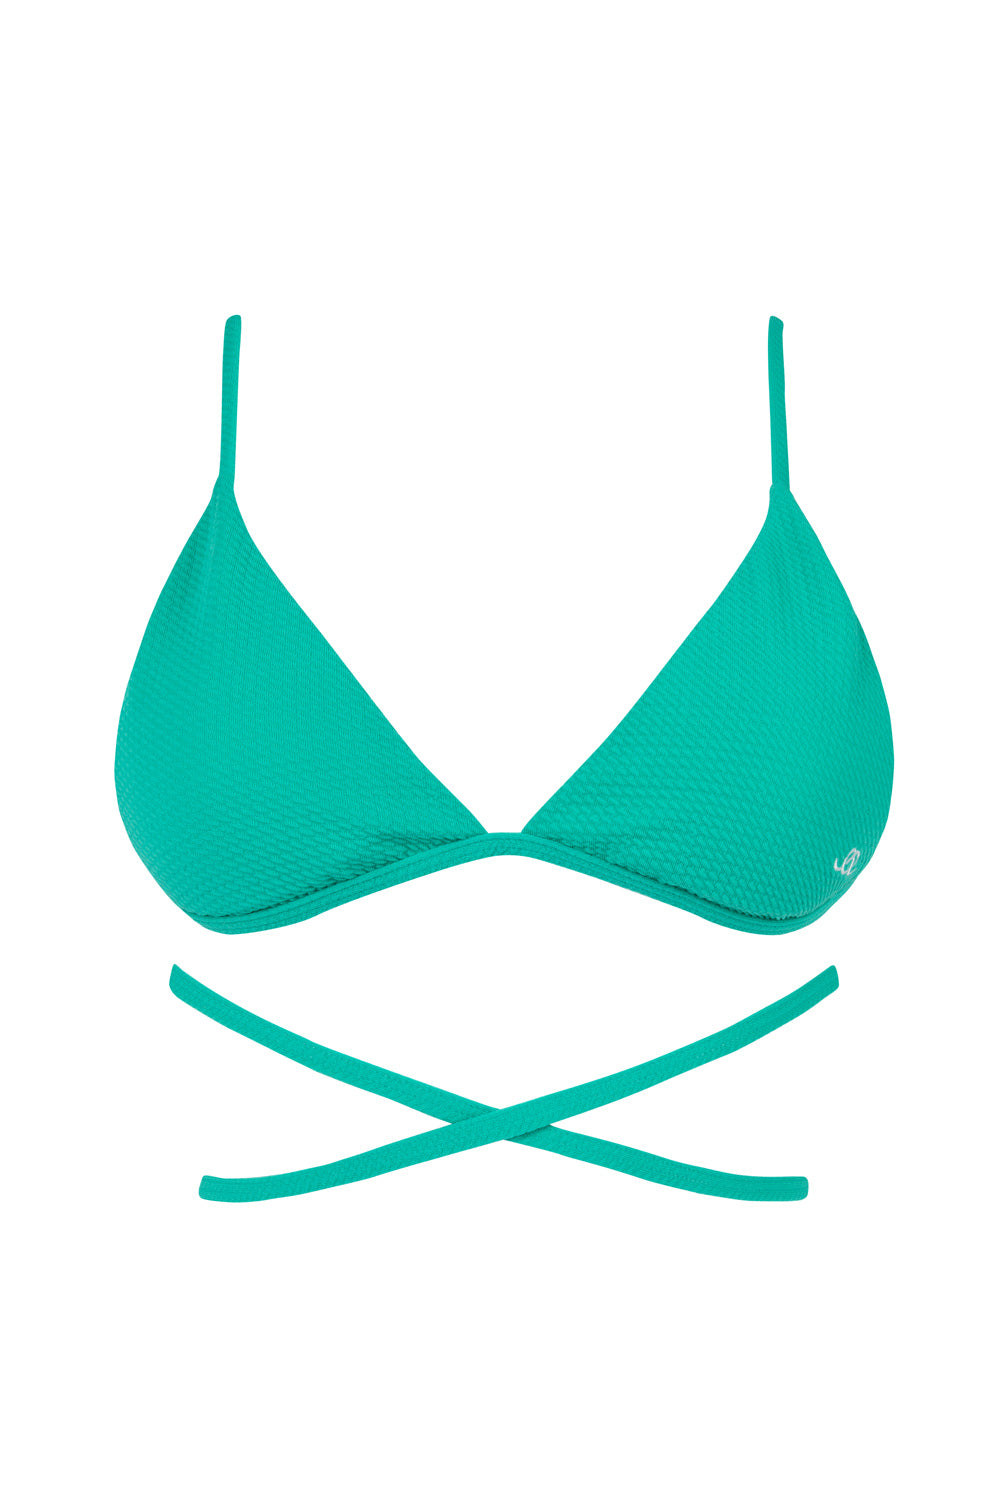 The Turquoise Isabella Triangle Top